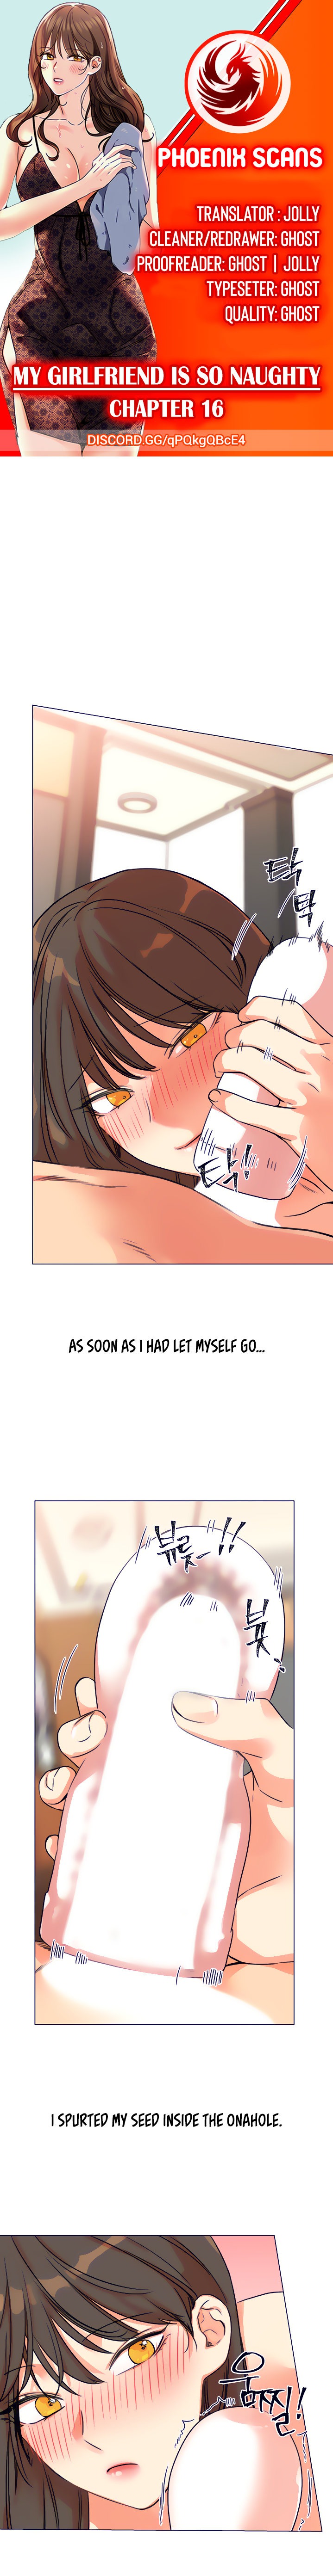 My girlfriend is so naughty - Chapter 16 Page 1